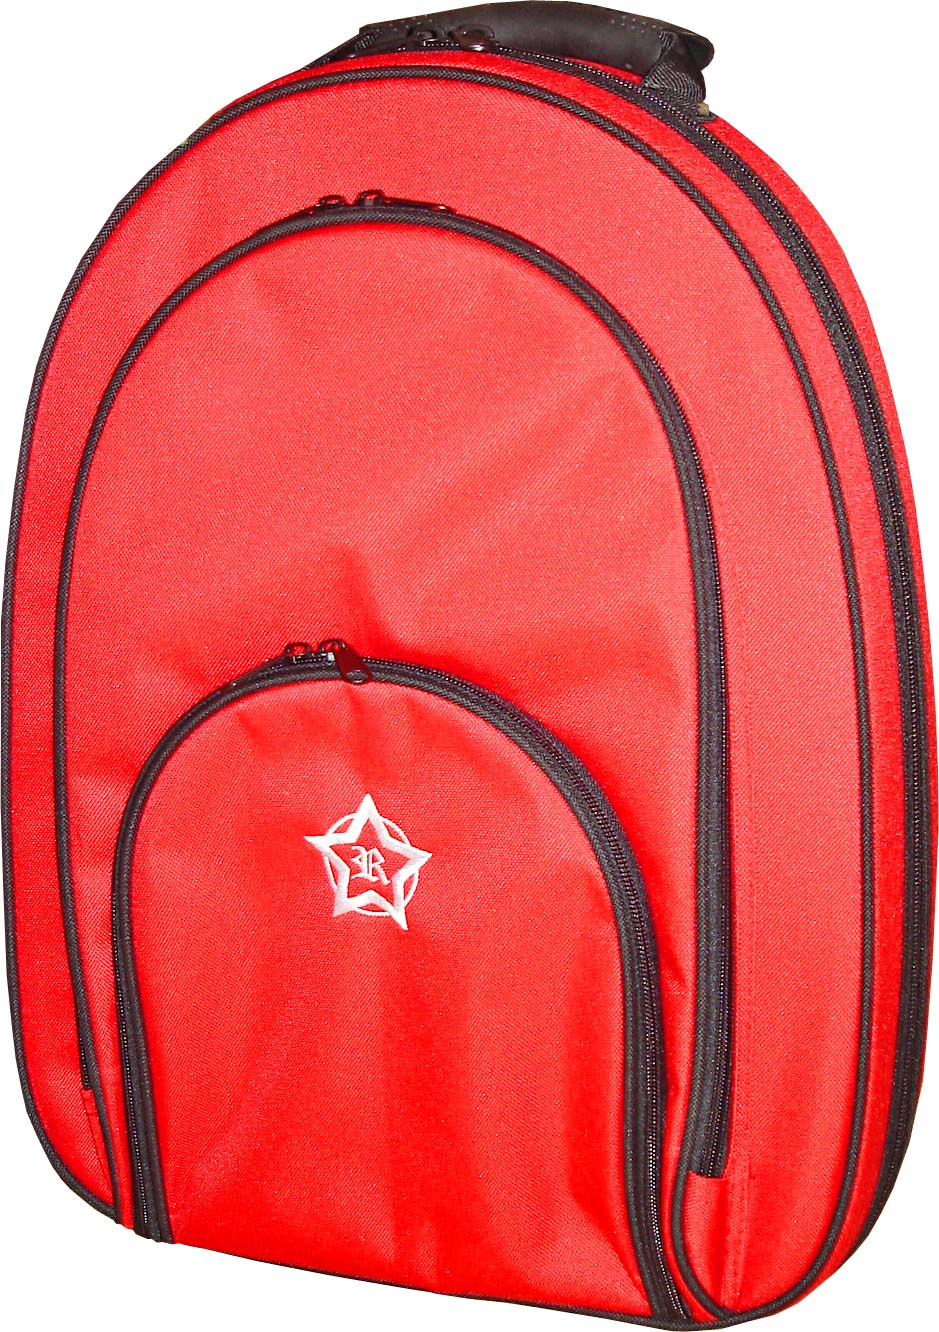 Rosetti Double Clarinet Bag - Red